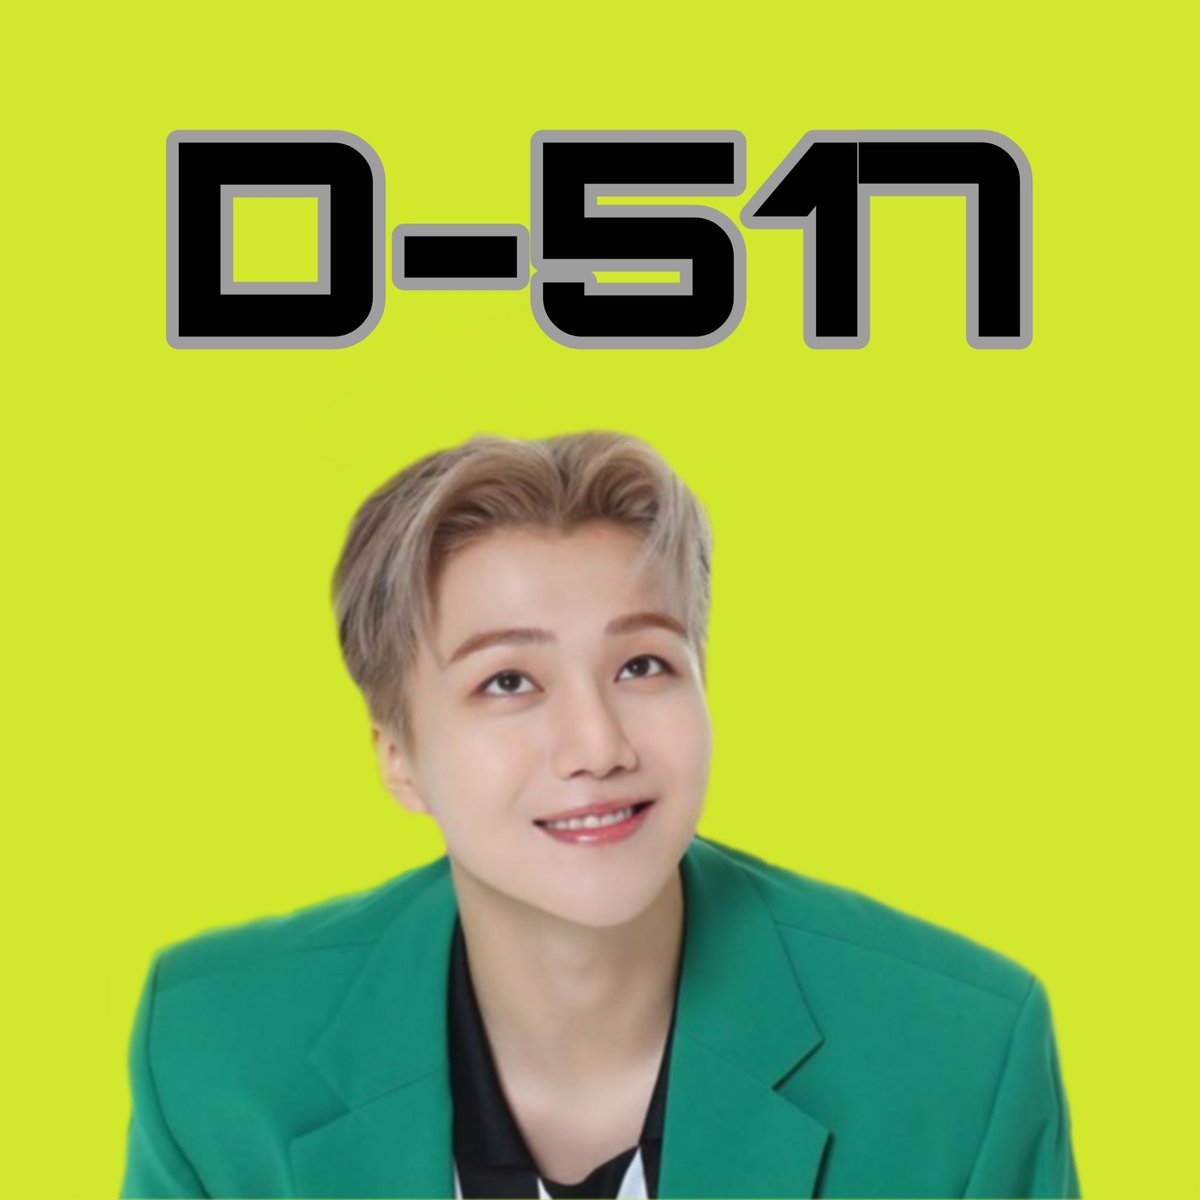 D-517- Tomorrow's the completion ceremony of Jinho's military training! Yay so happy for him. Hopefully his members will be there if they're not busy. Fightjng today too Jinho!   #PENTAGON  #JINHO  #펜타곤  #진호  @CUBE_PTG